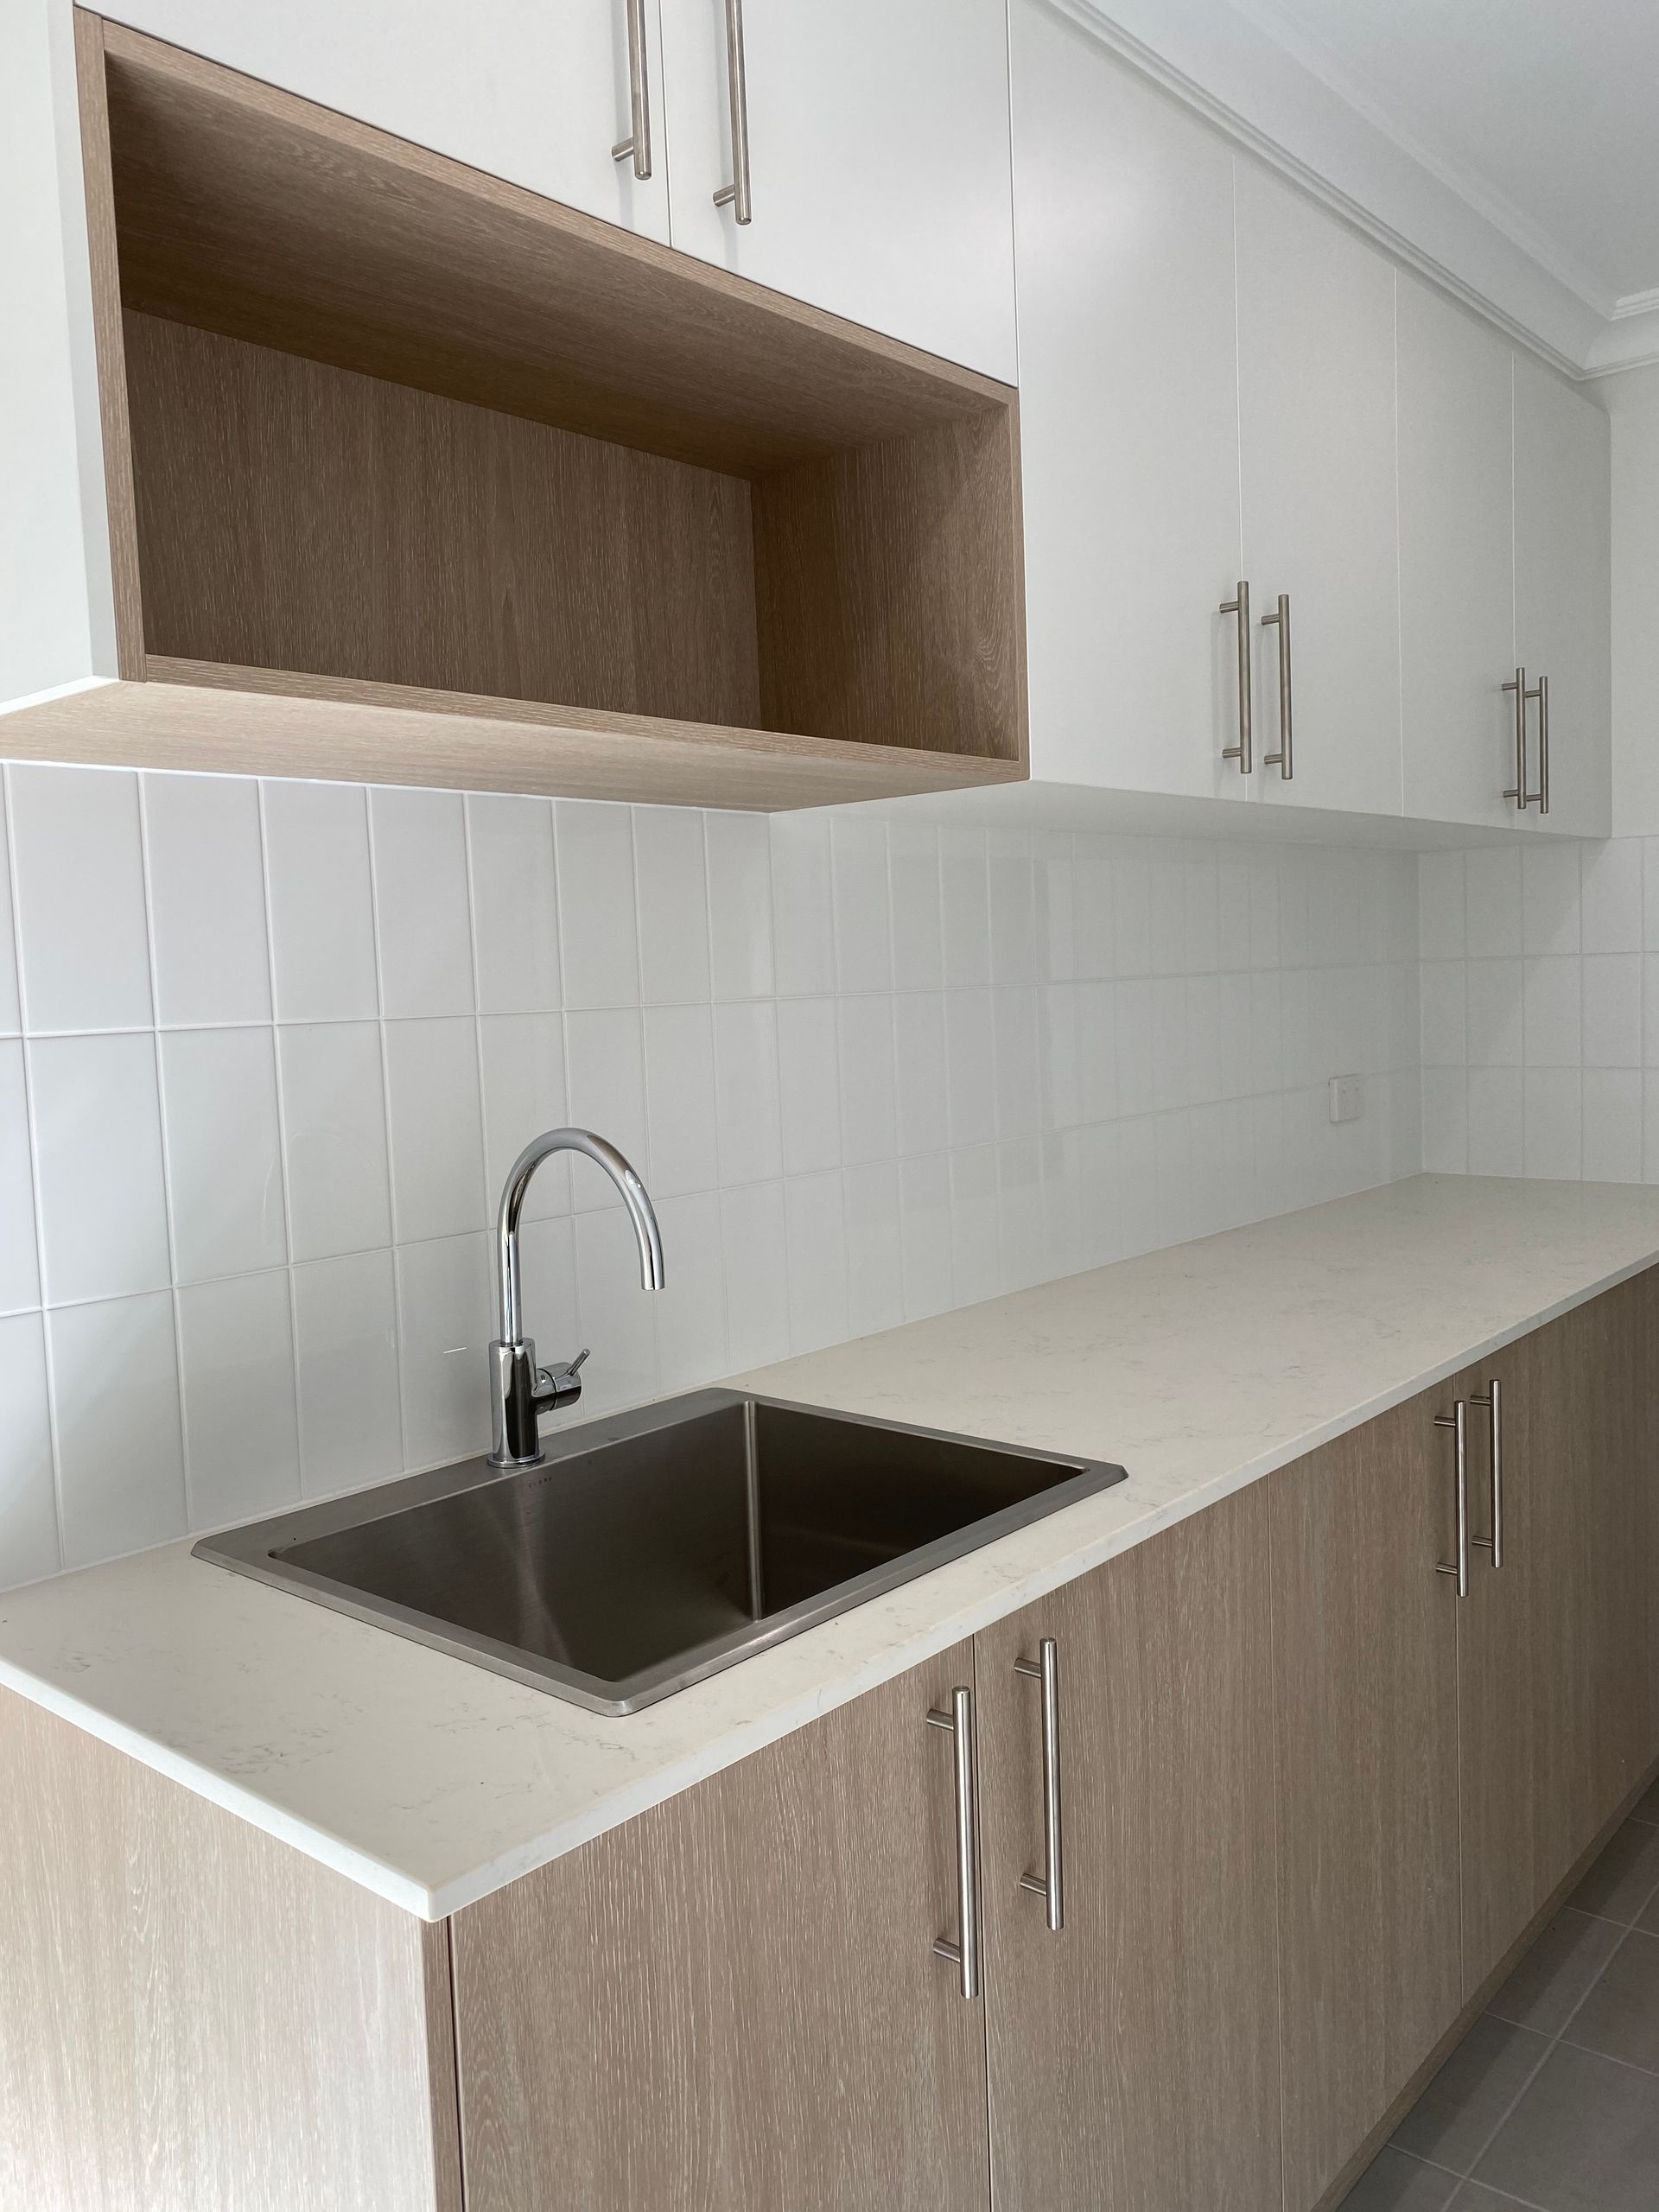 Sink and White Tiles — Kitchen Renovations in Dubbo, QLD